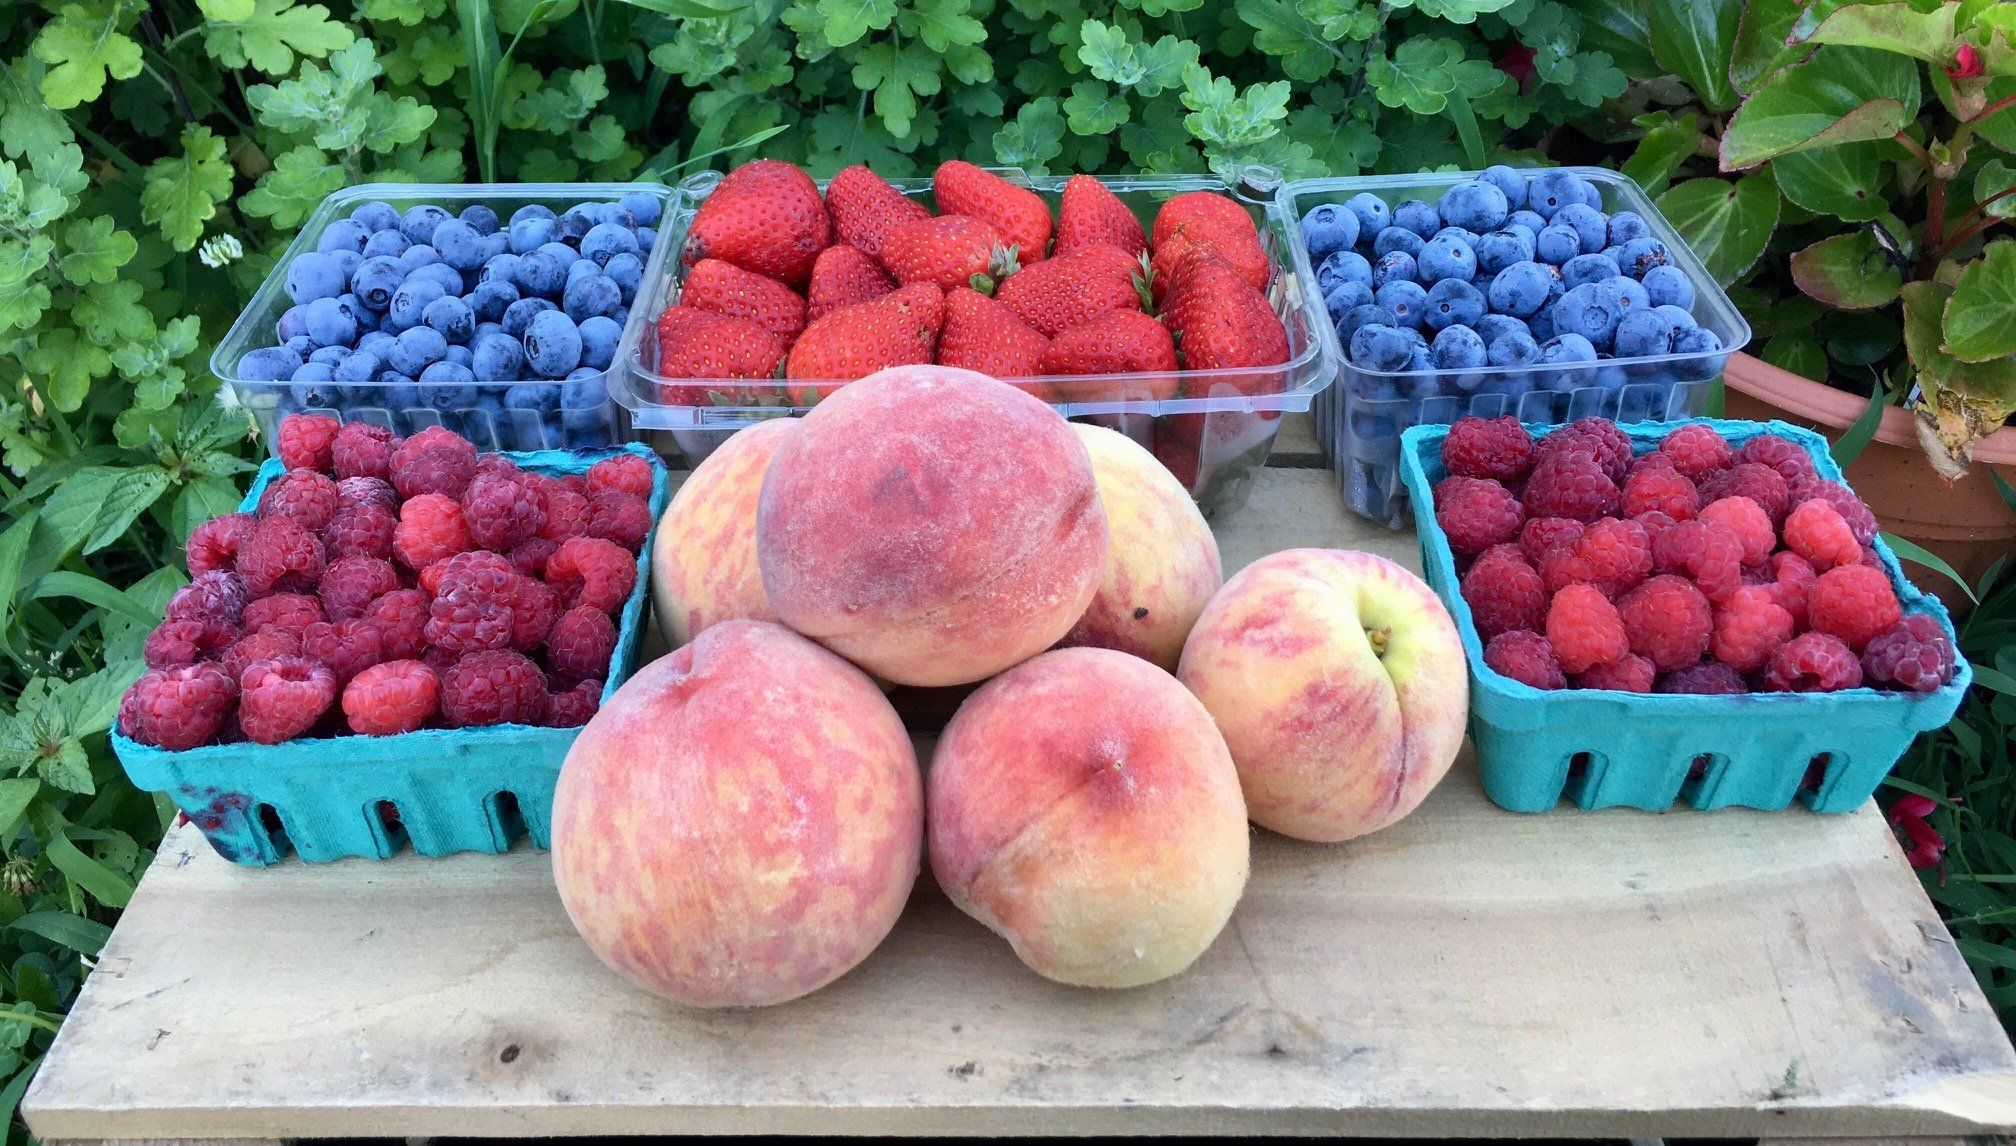 Next Happening: National Farmers Market Week and Agriberry Customer Appreciation Week!